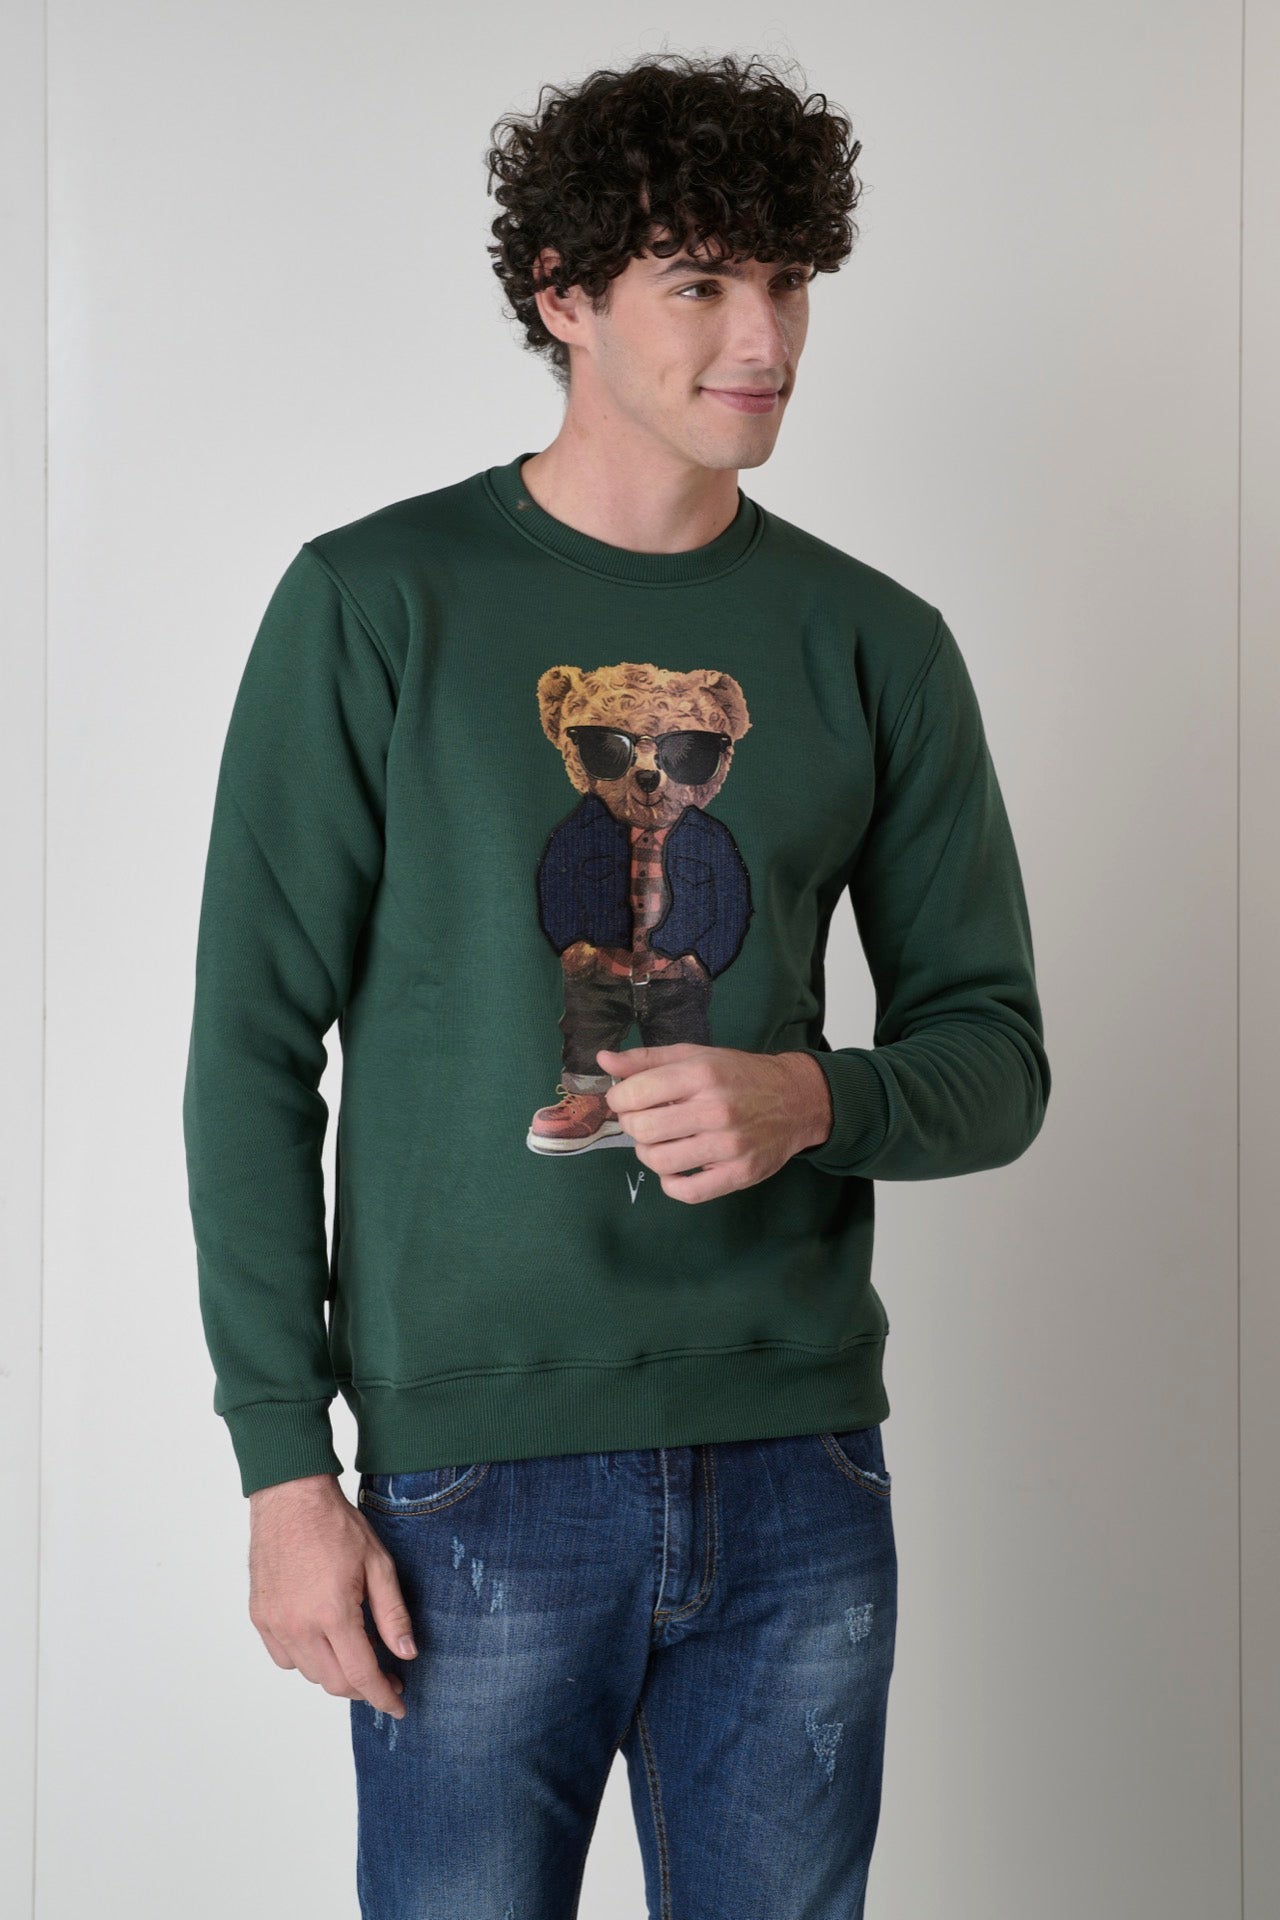 Green sweatshirt with Teddy print and jeans fabric insert